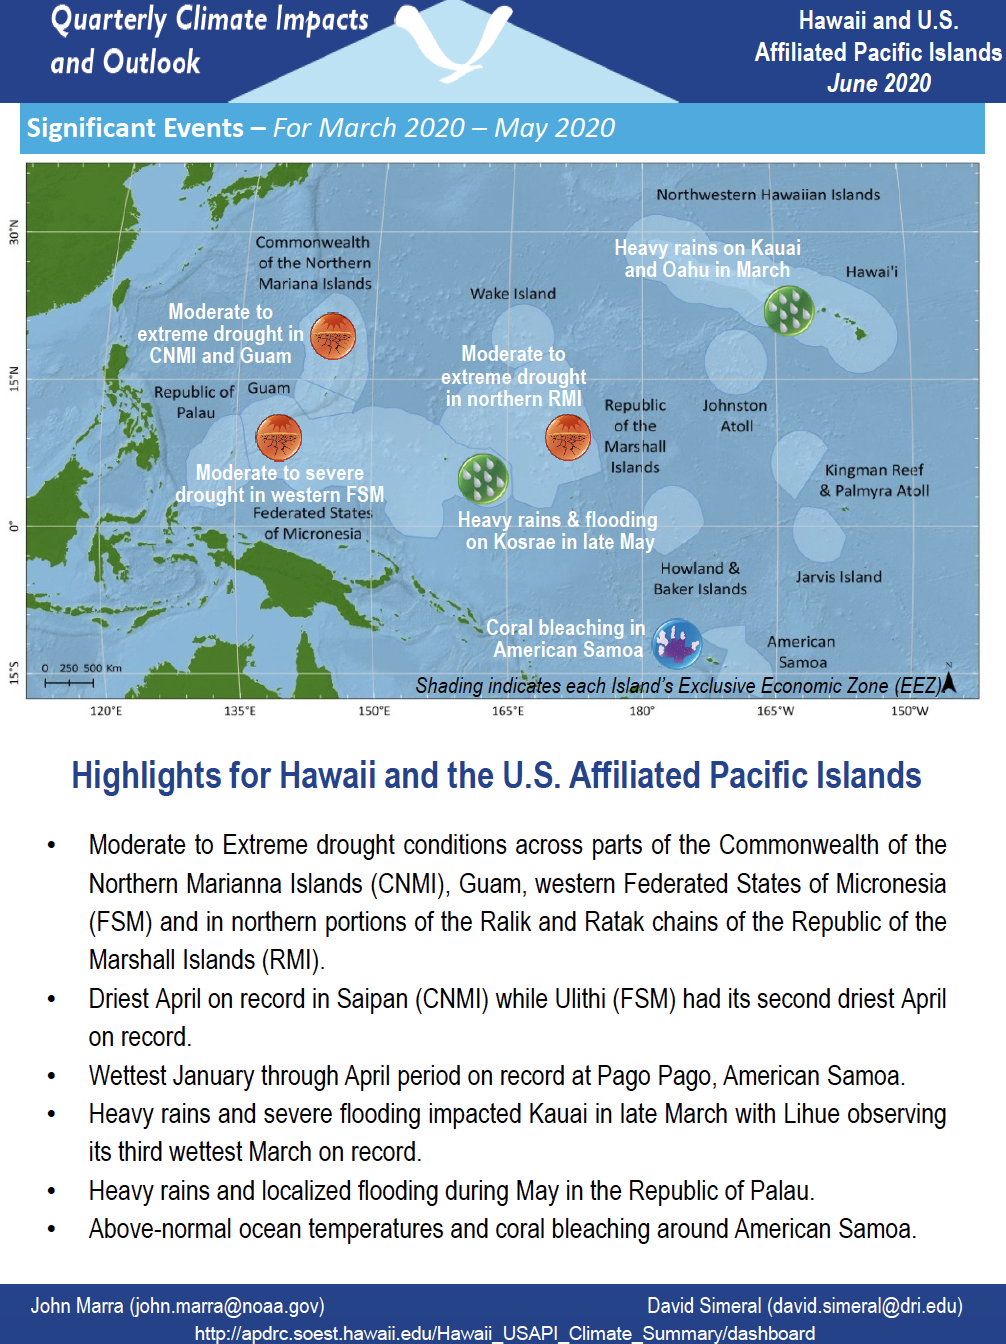 First page of the Quarterly Climate Impacts and Outlook for the Pacific Region - June 2020